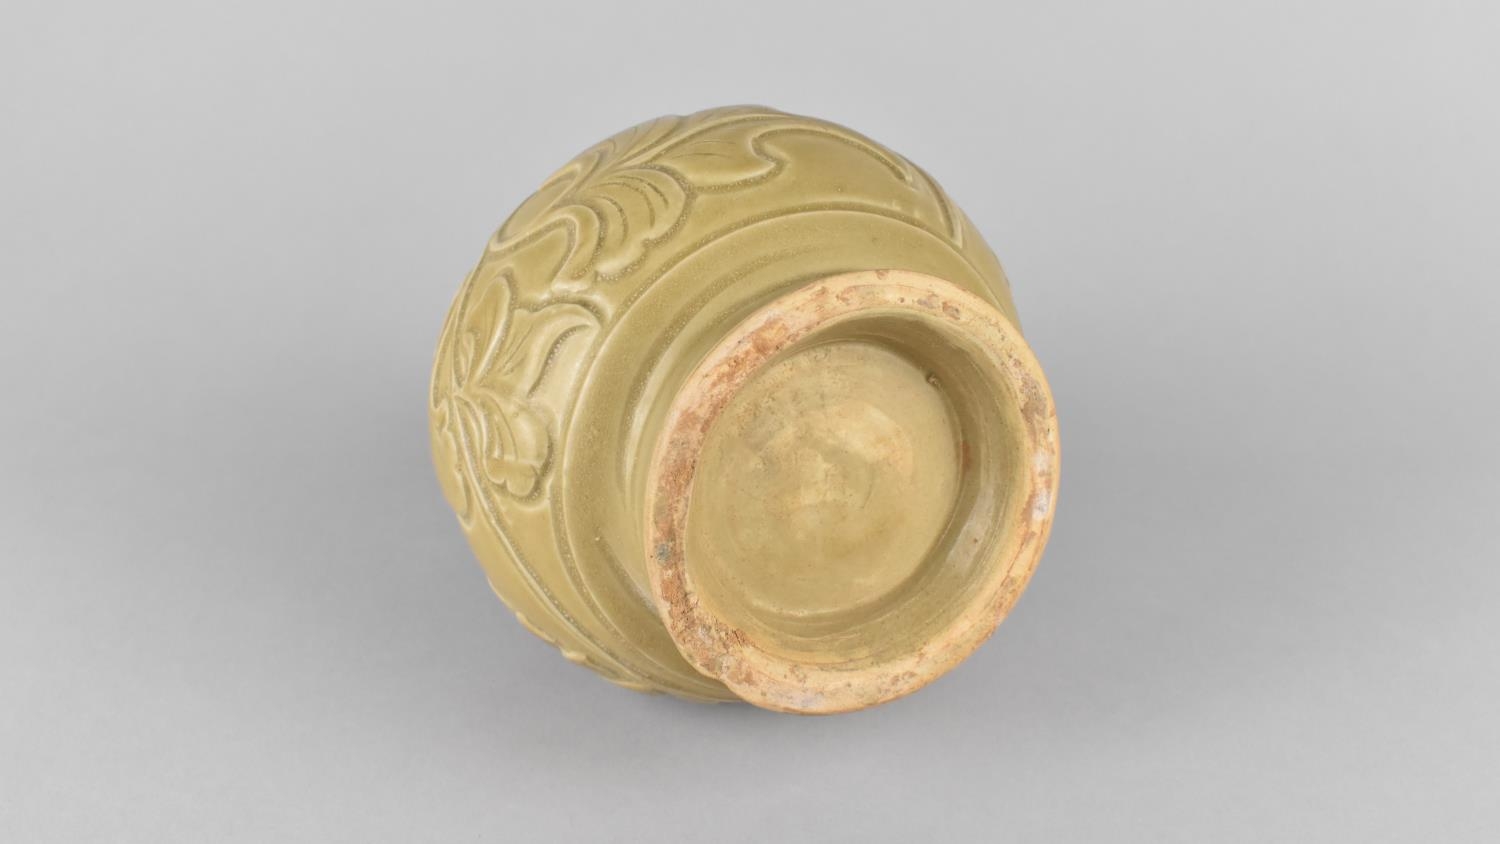 A Chinese Celadon Ewer the Body Decorated with Incised Foliage Design and Having Zoomorphic Spout, - Image 3 of 3